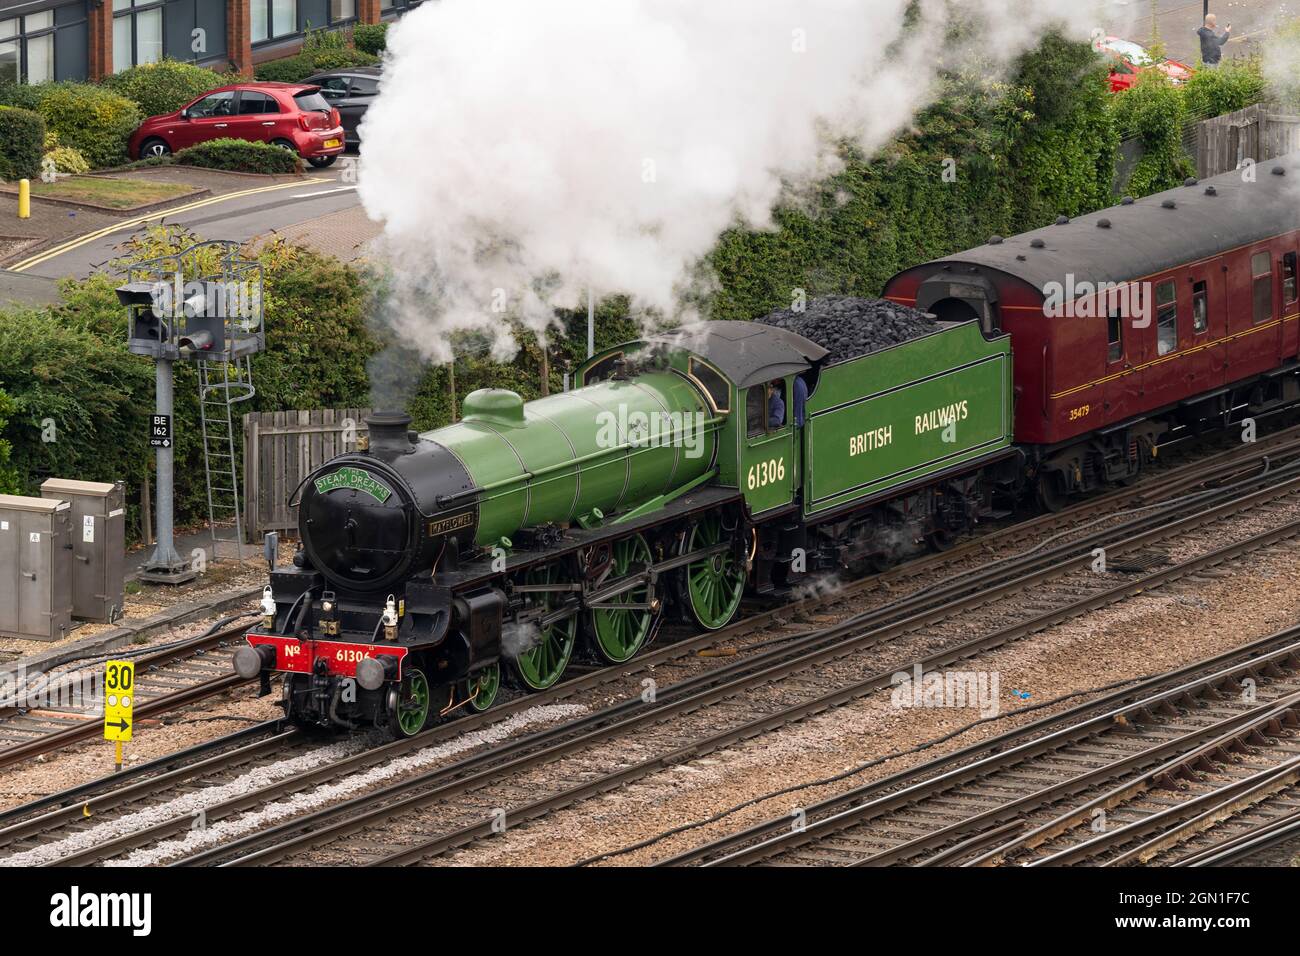 The Mayflower 61306 B1 steam locomotive painted in the early British Railways apple green livery, pulling out of Basingstoke train station, UK Stock Photo